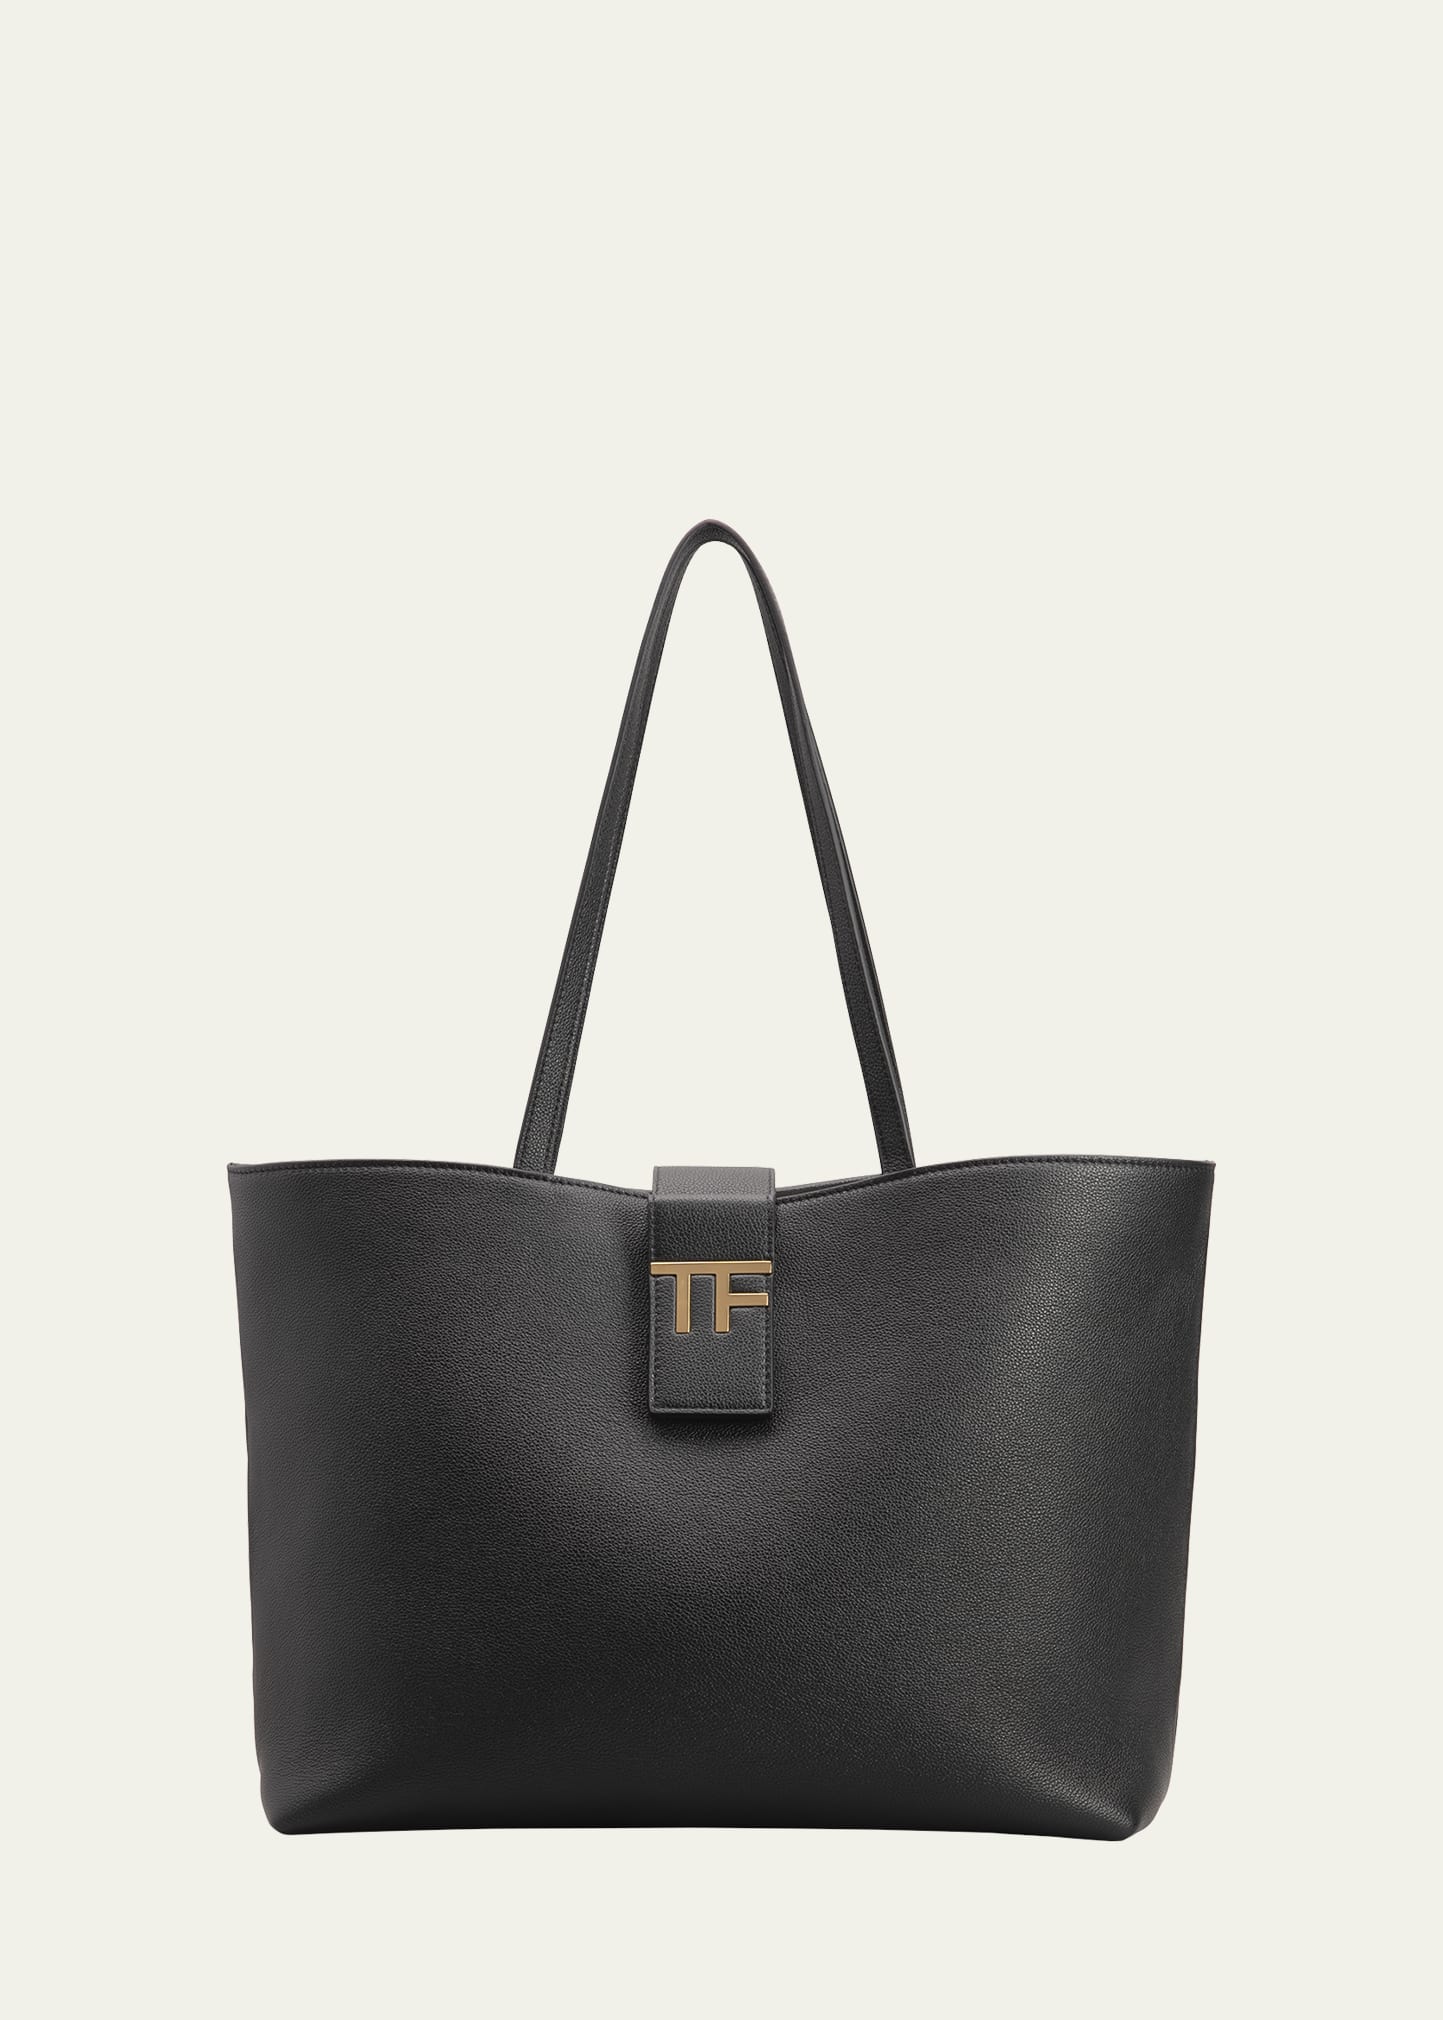 Tom Ford Tf Small Grain Leather East-west Tote Bag In Black